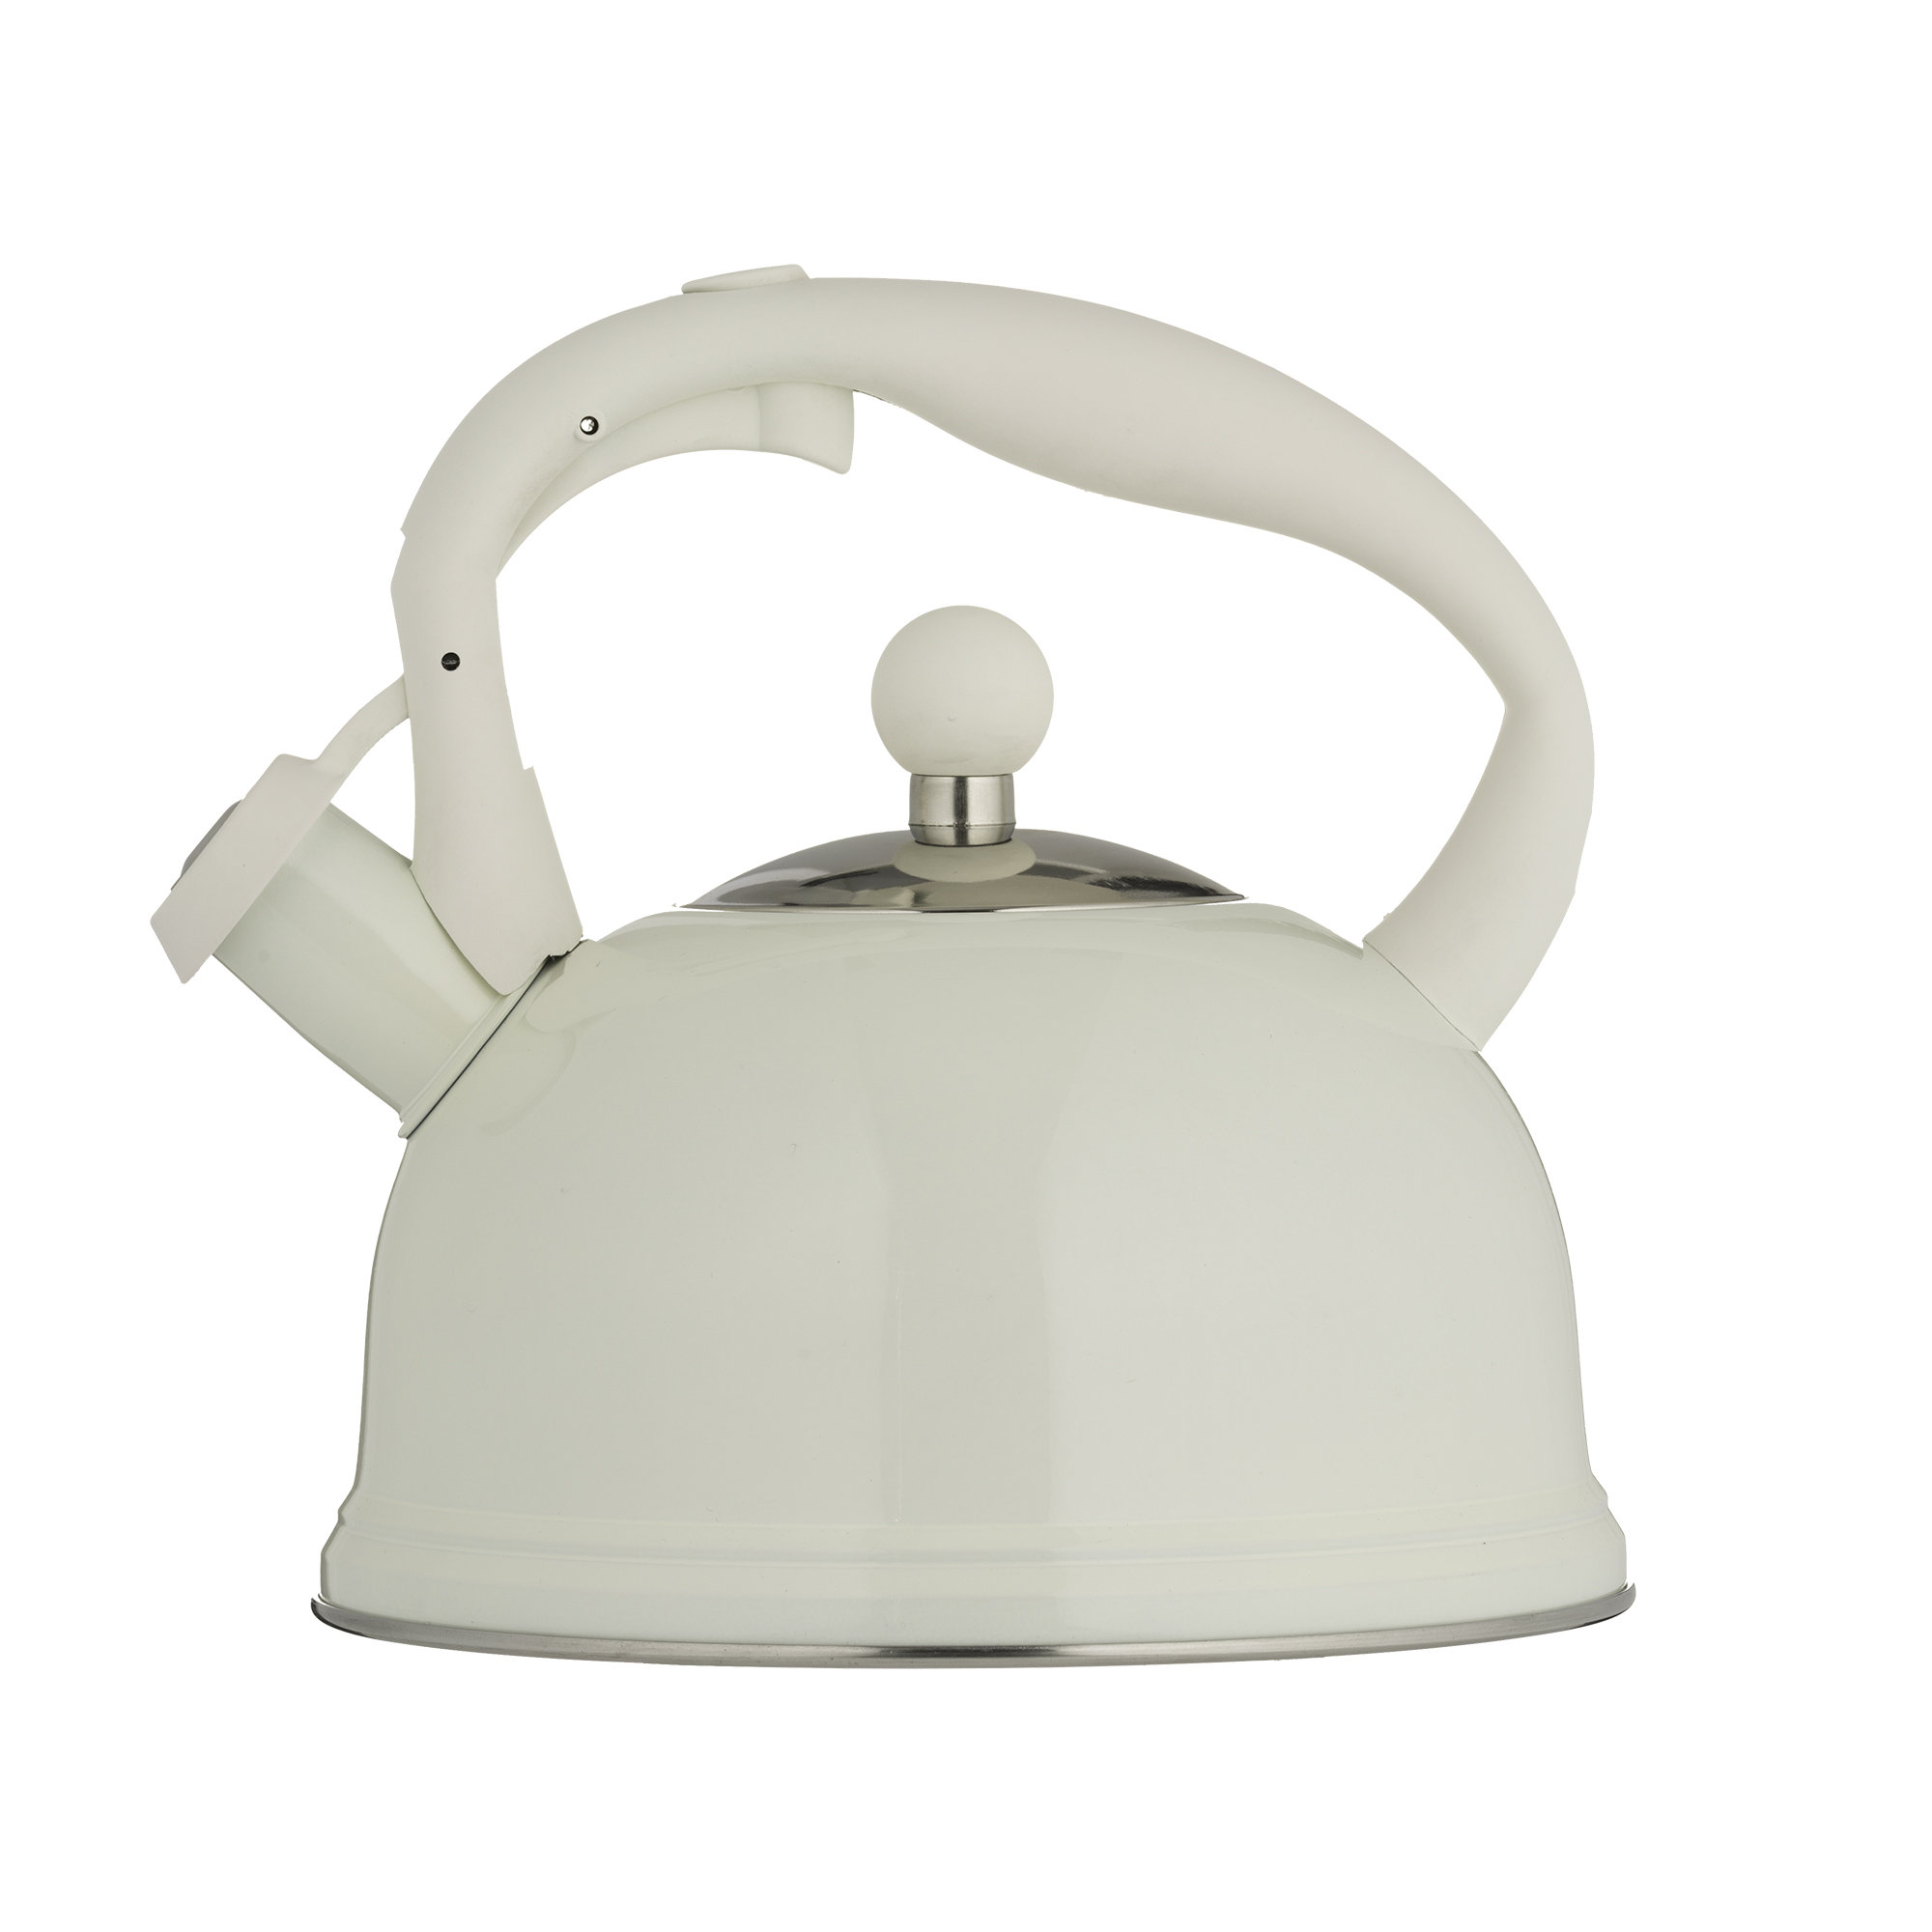 I like stove top kettles with their whistling noise, but electrical kettles  seem more convenient. Which one would you choose and why? - Quora